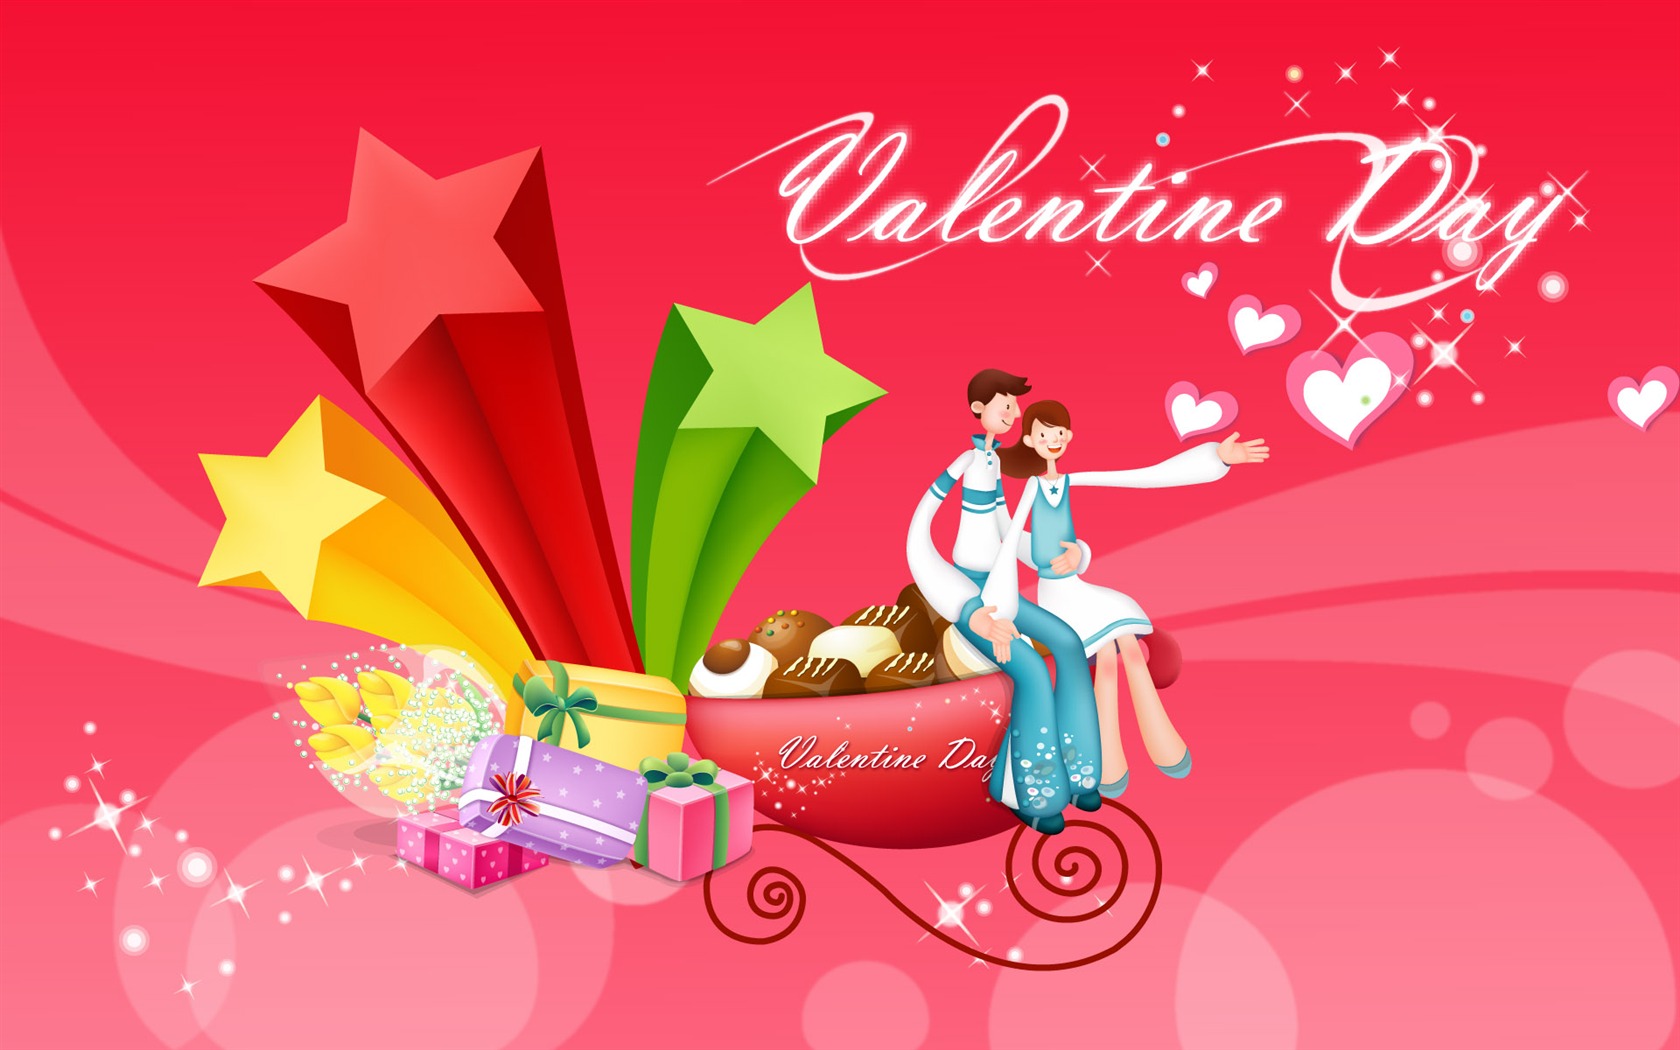 Valentine's Day Theme Wallpapers (2) #1 - 1680x1050